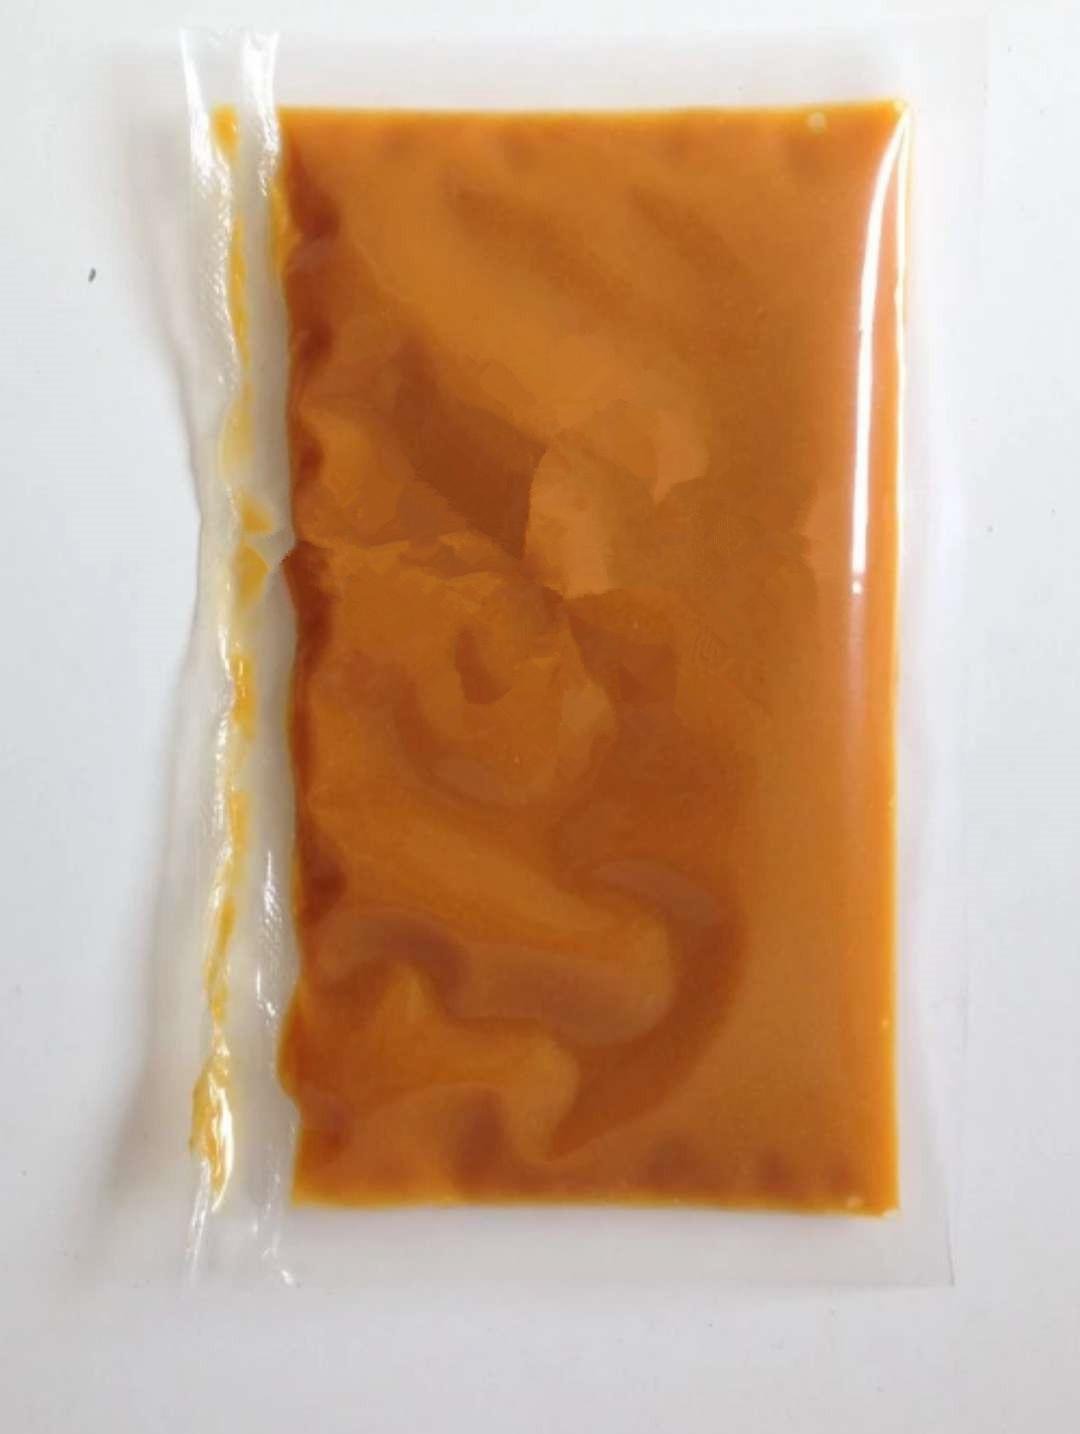 yellow peach puree concentrate with brix 30-32% 2